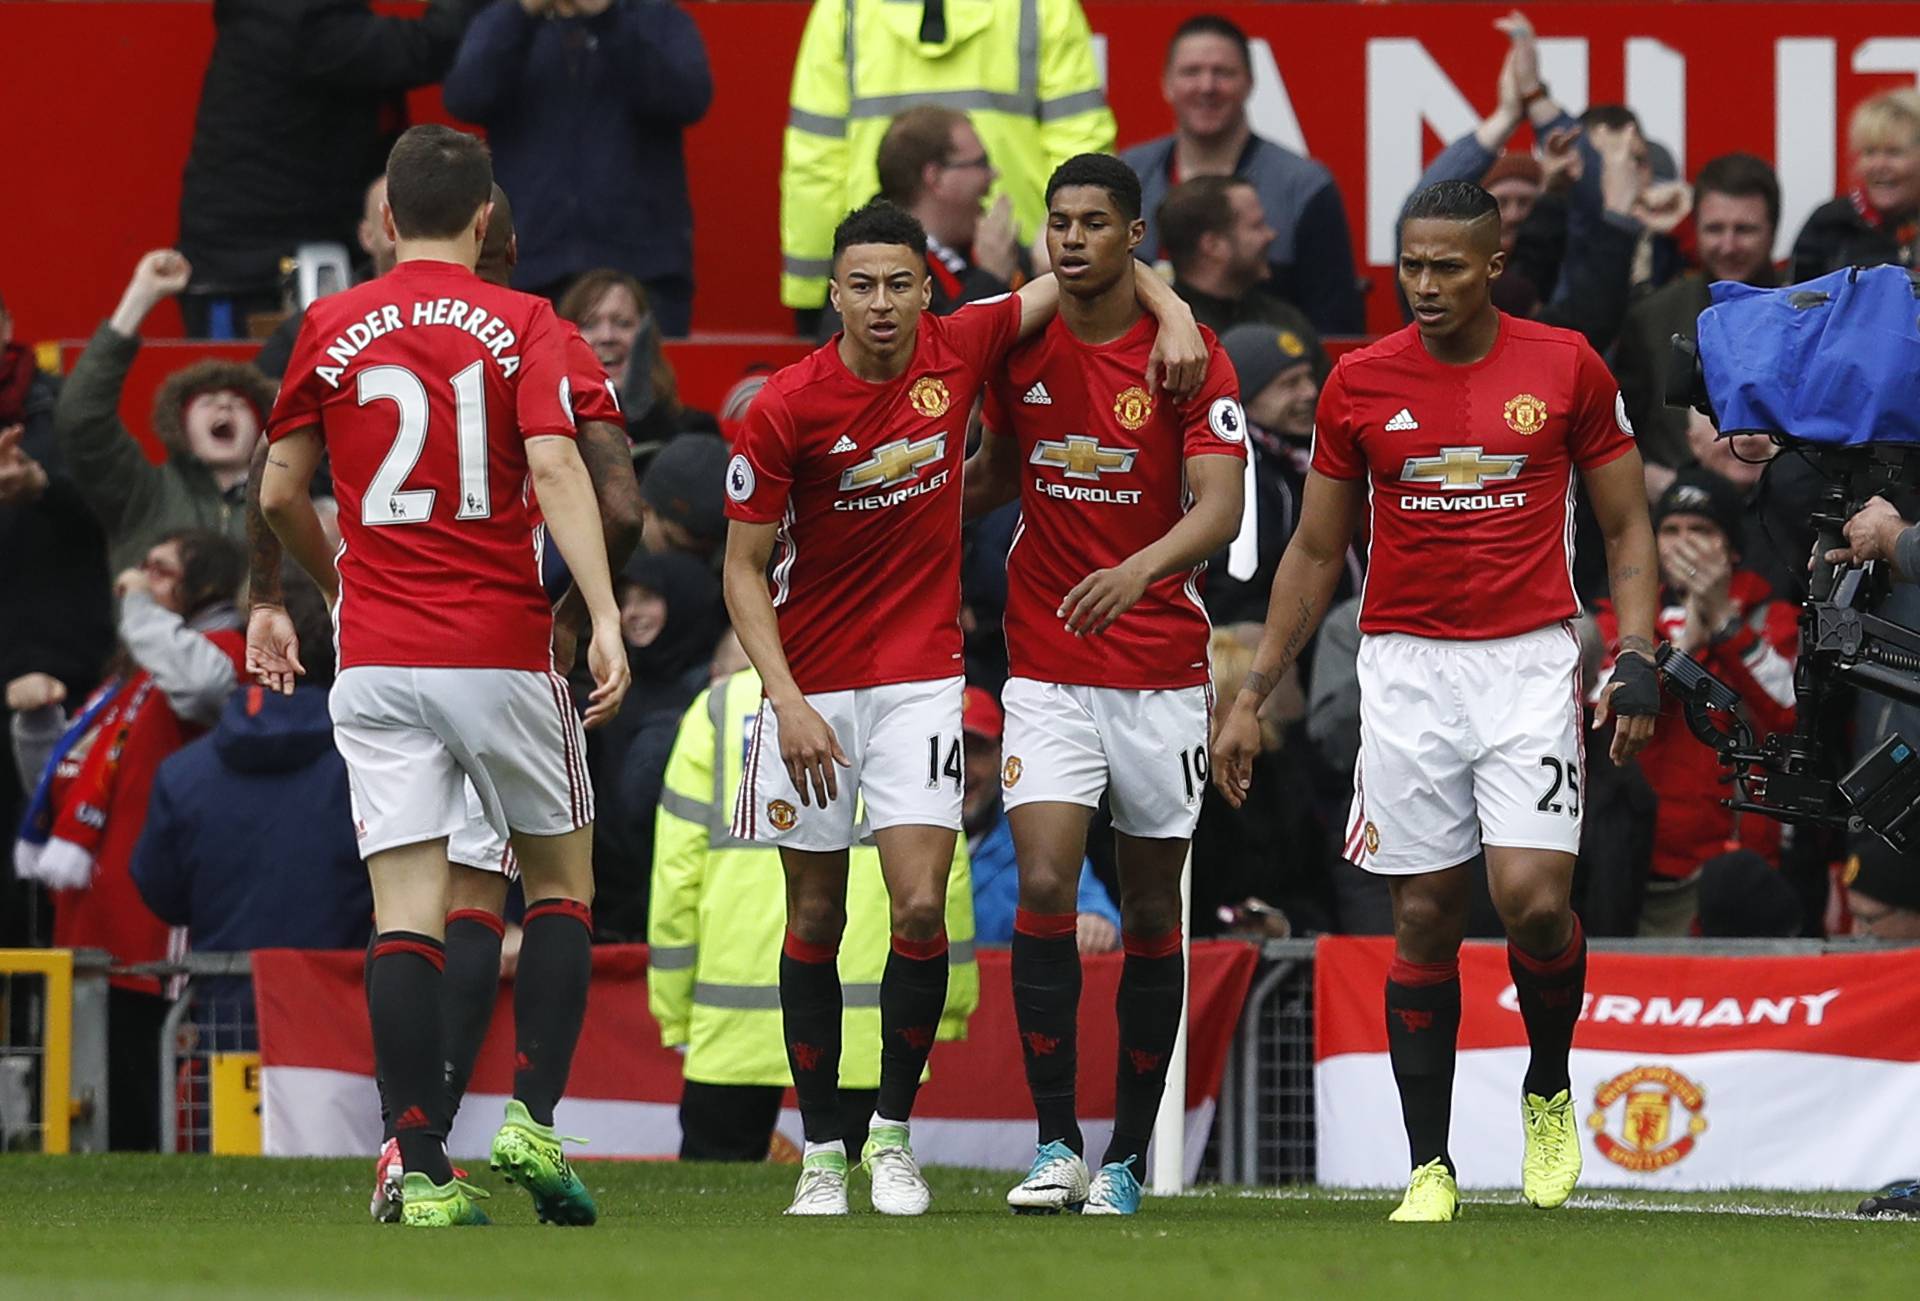 Manchester United's Marcus Rashford celebrates scoring their first goal with team mates